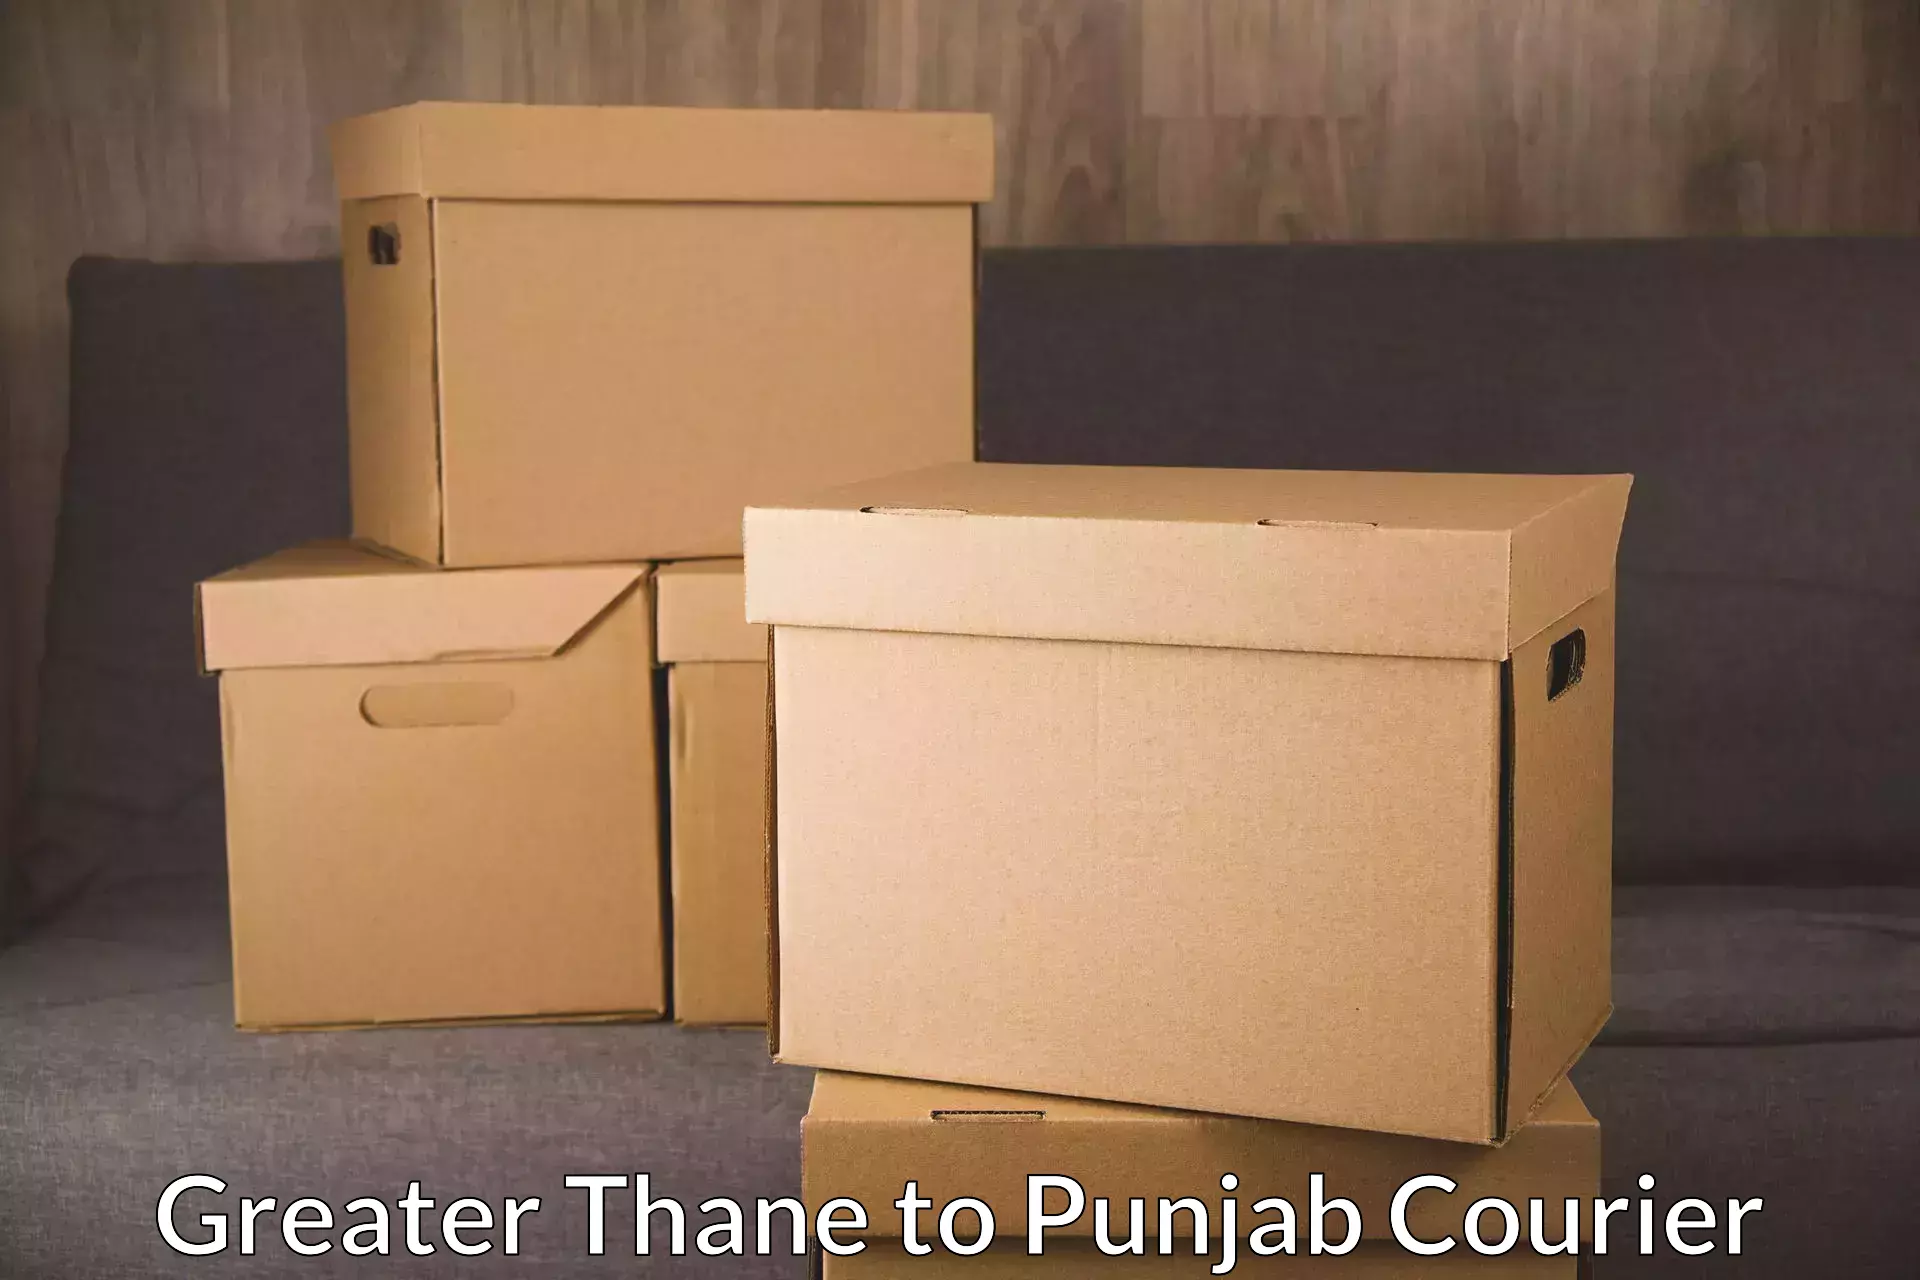 Nationwide courier service Greater Thane to Punjab